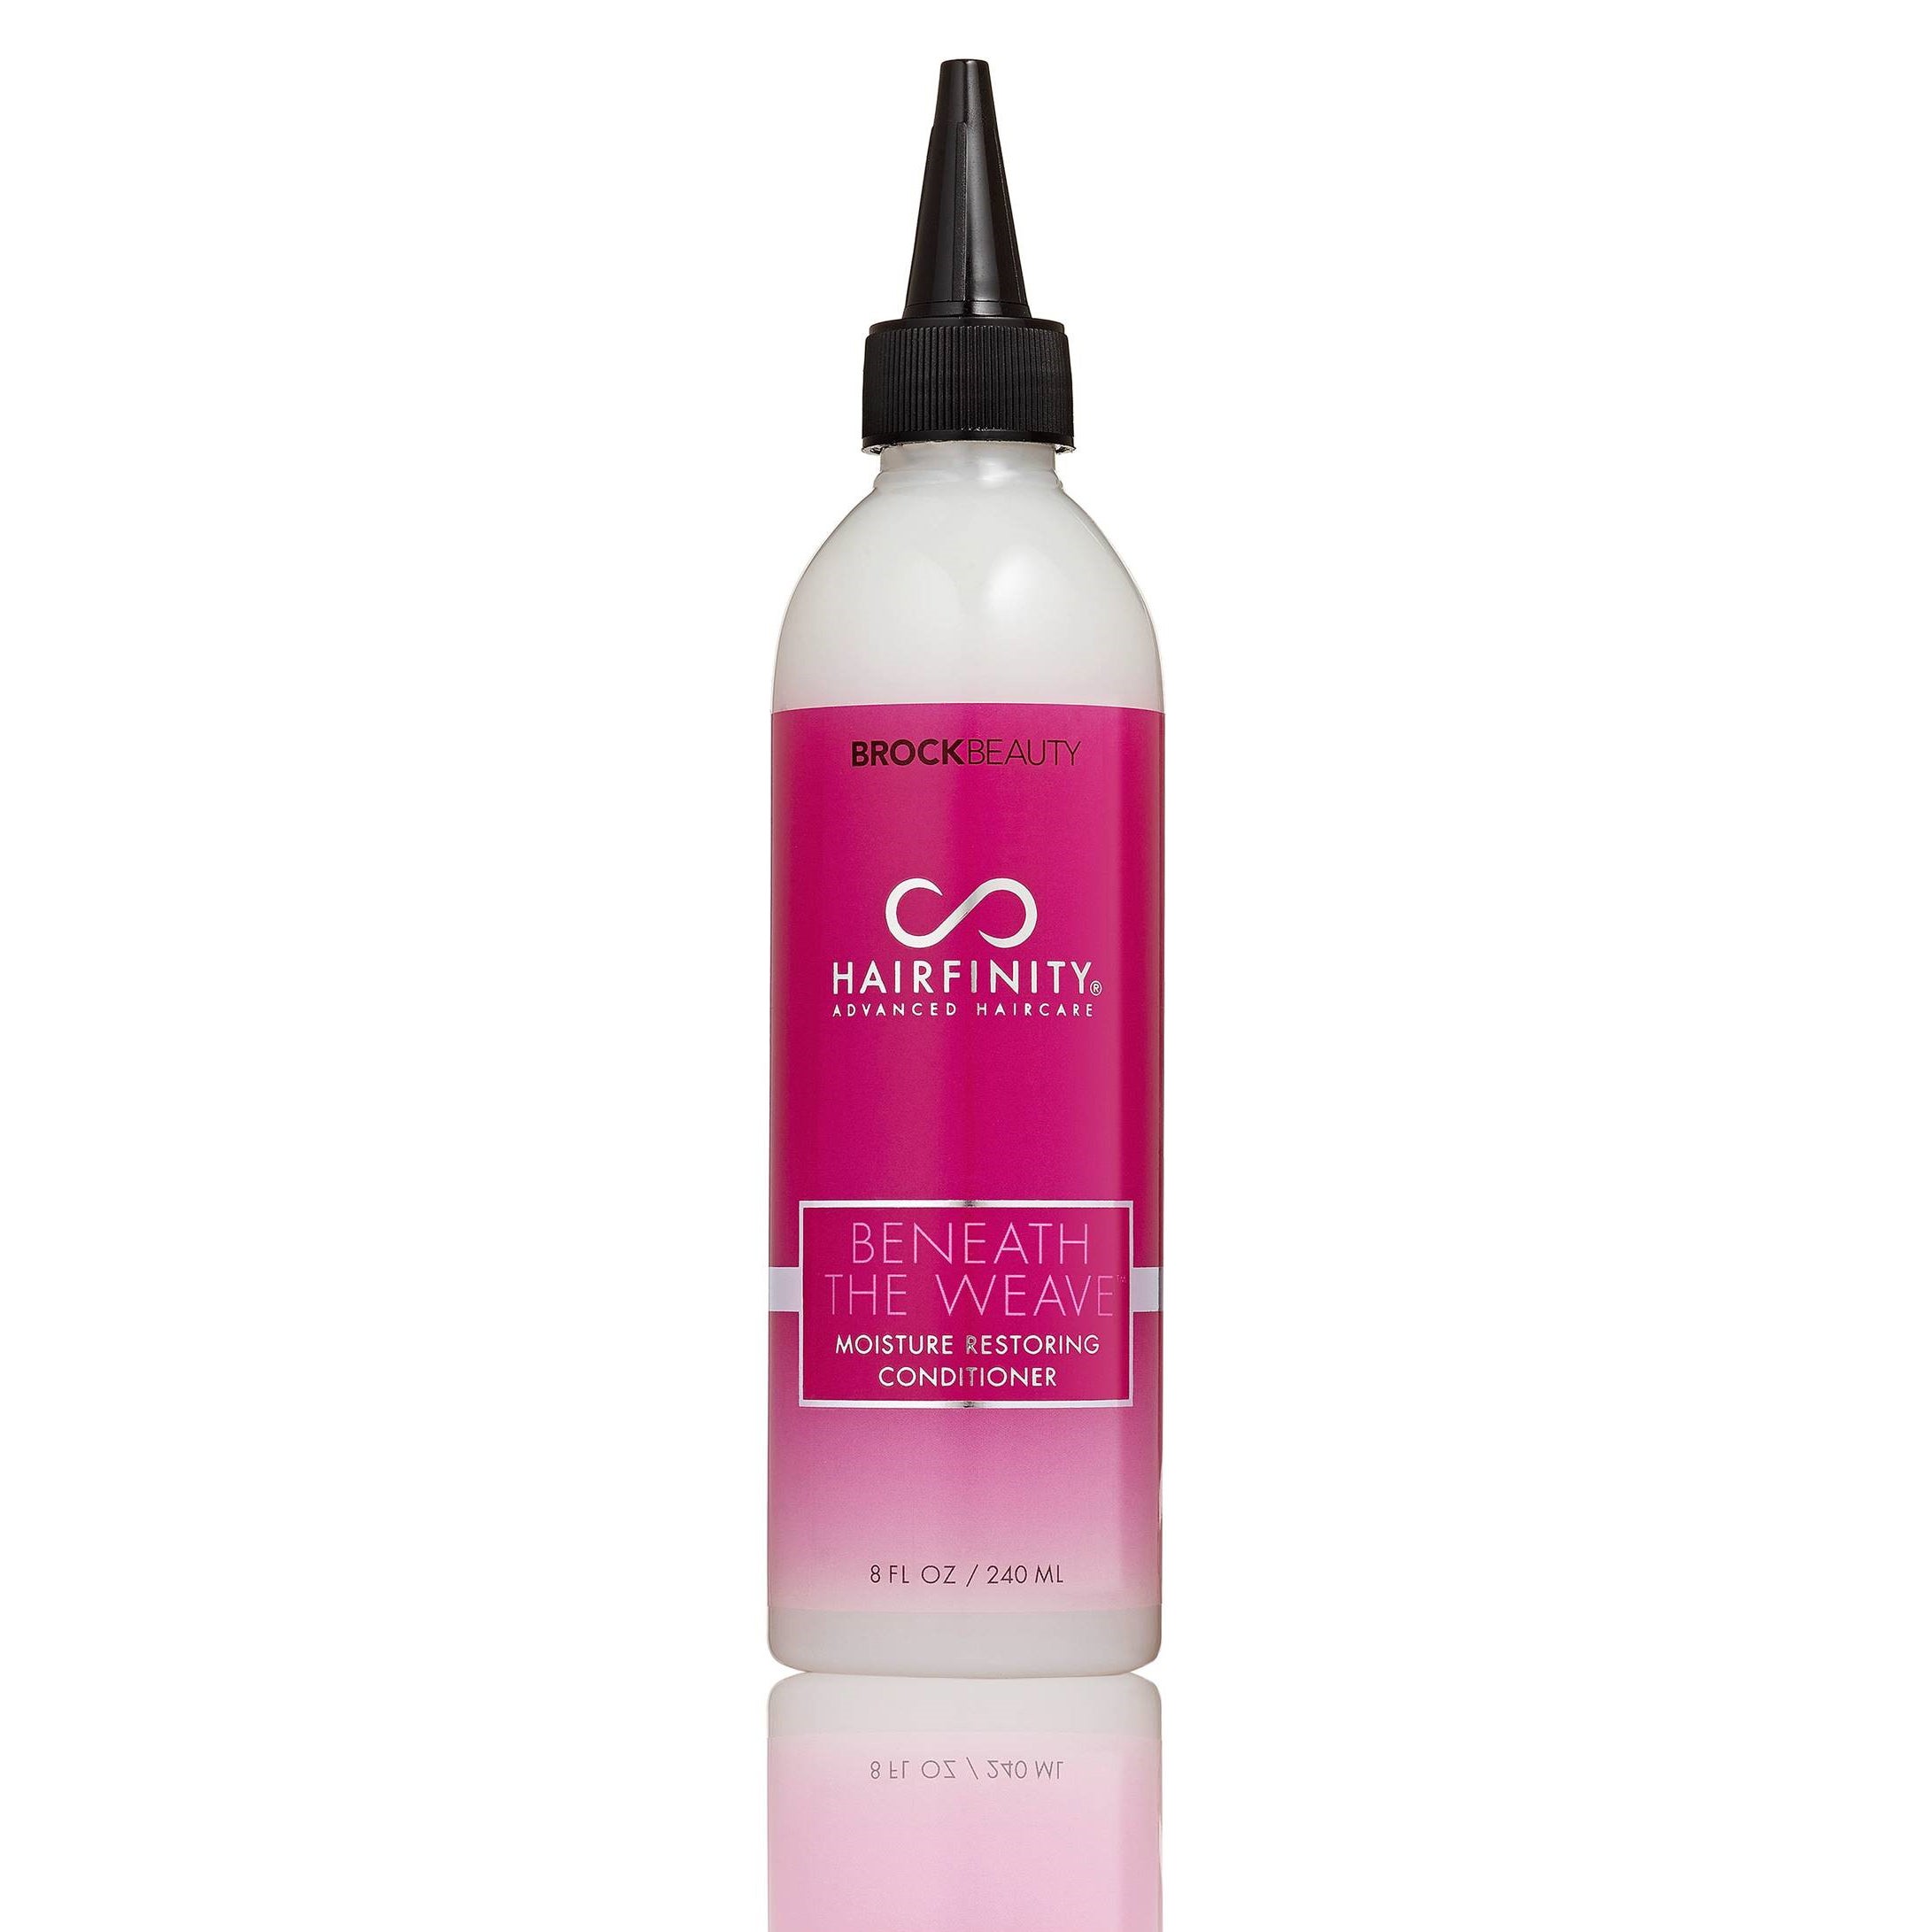 Prepare To Be Obsessed With Hairfinity’s Latest Breakthrough